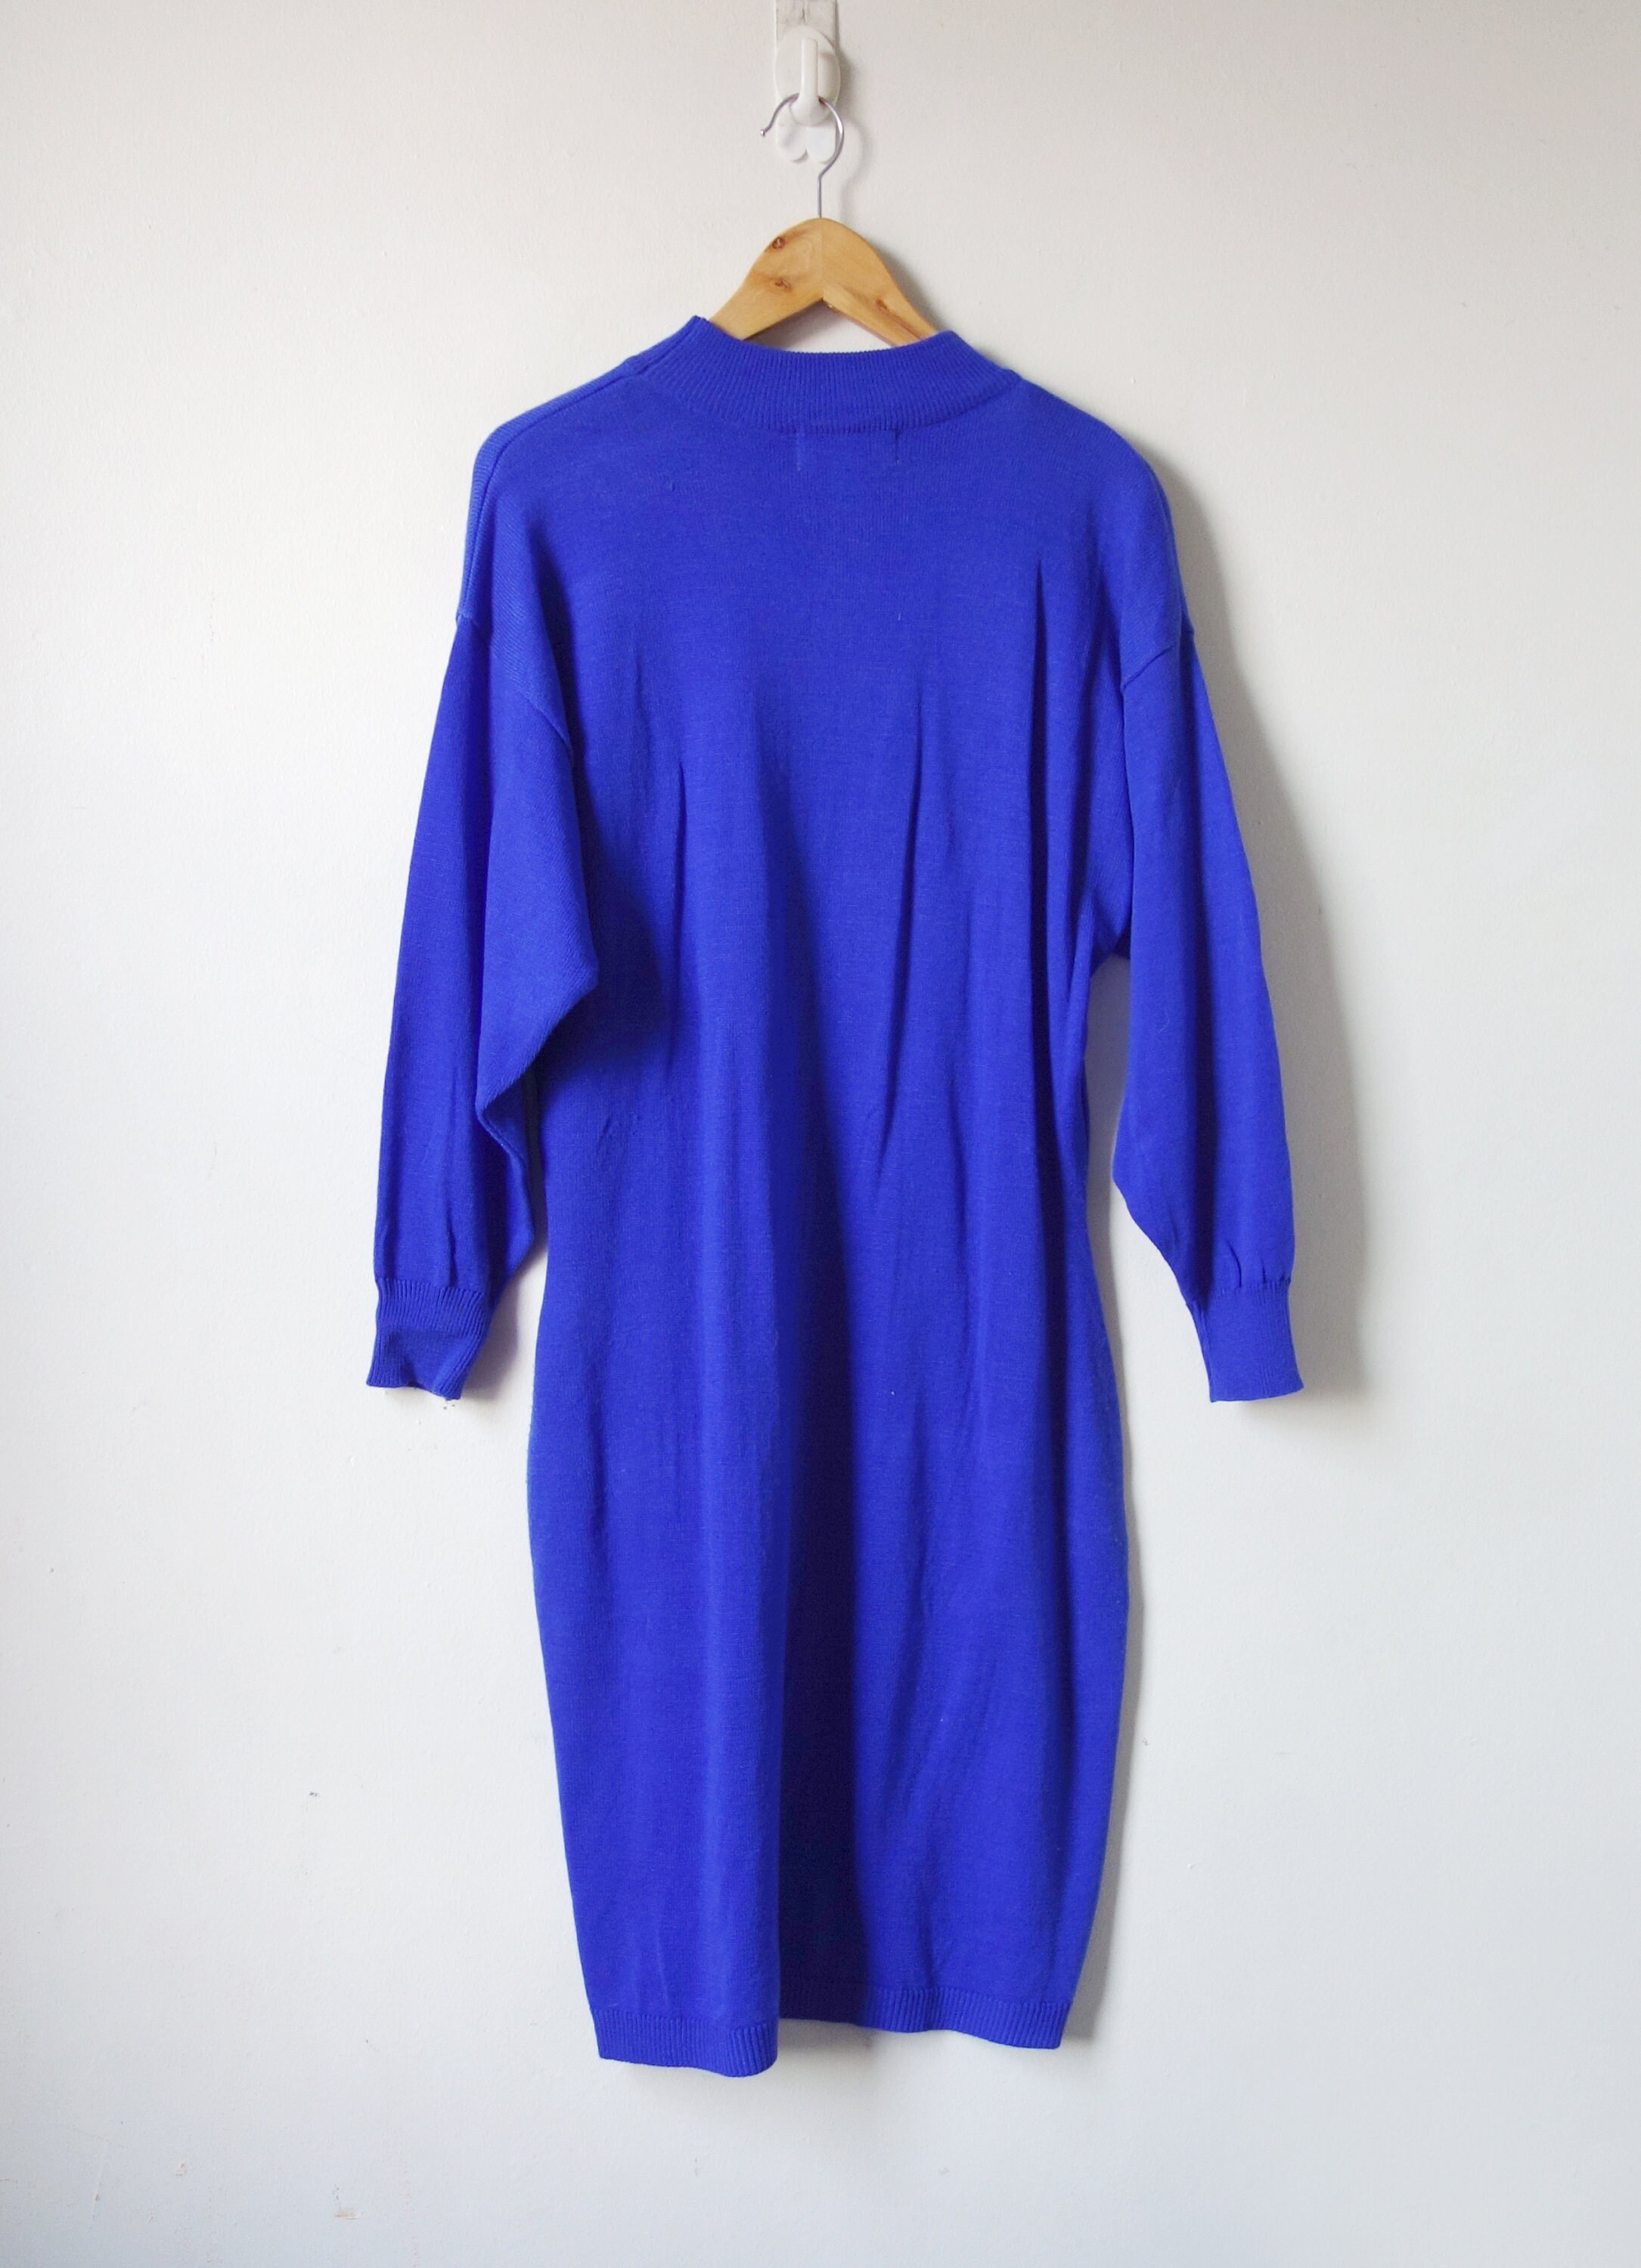 80s Royal Blue Sweater Dress with Embroidery & Sequins 80s | Etsy